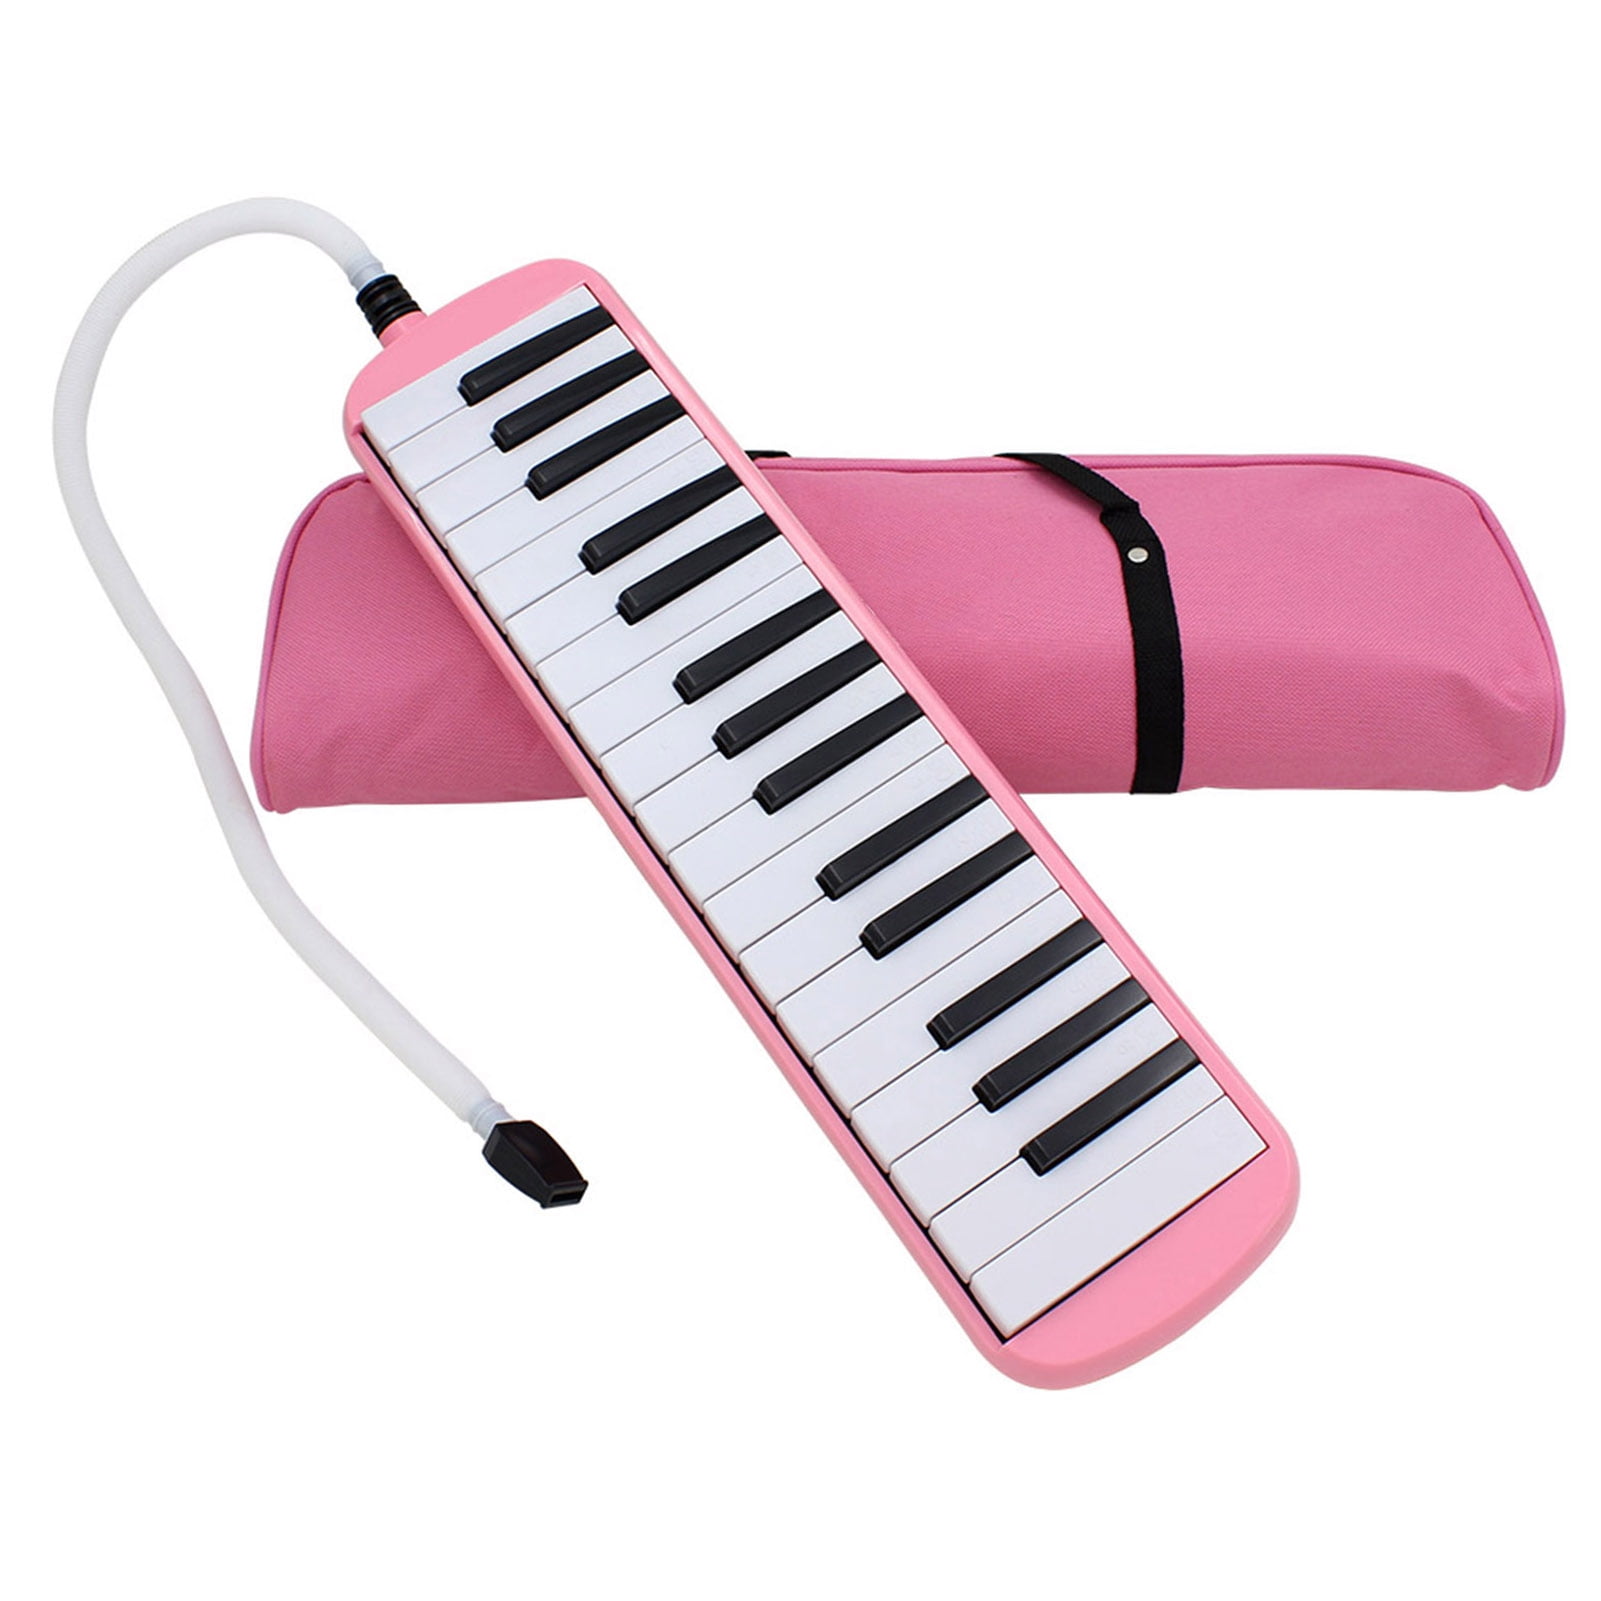 32 Piano Keys Melodica Musical Instrument for Music Lovers Beginners Gift  with Carrying Bag 